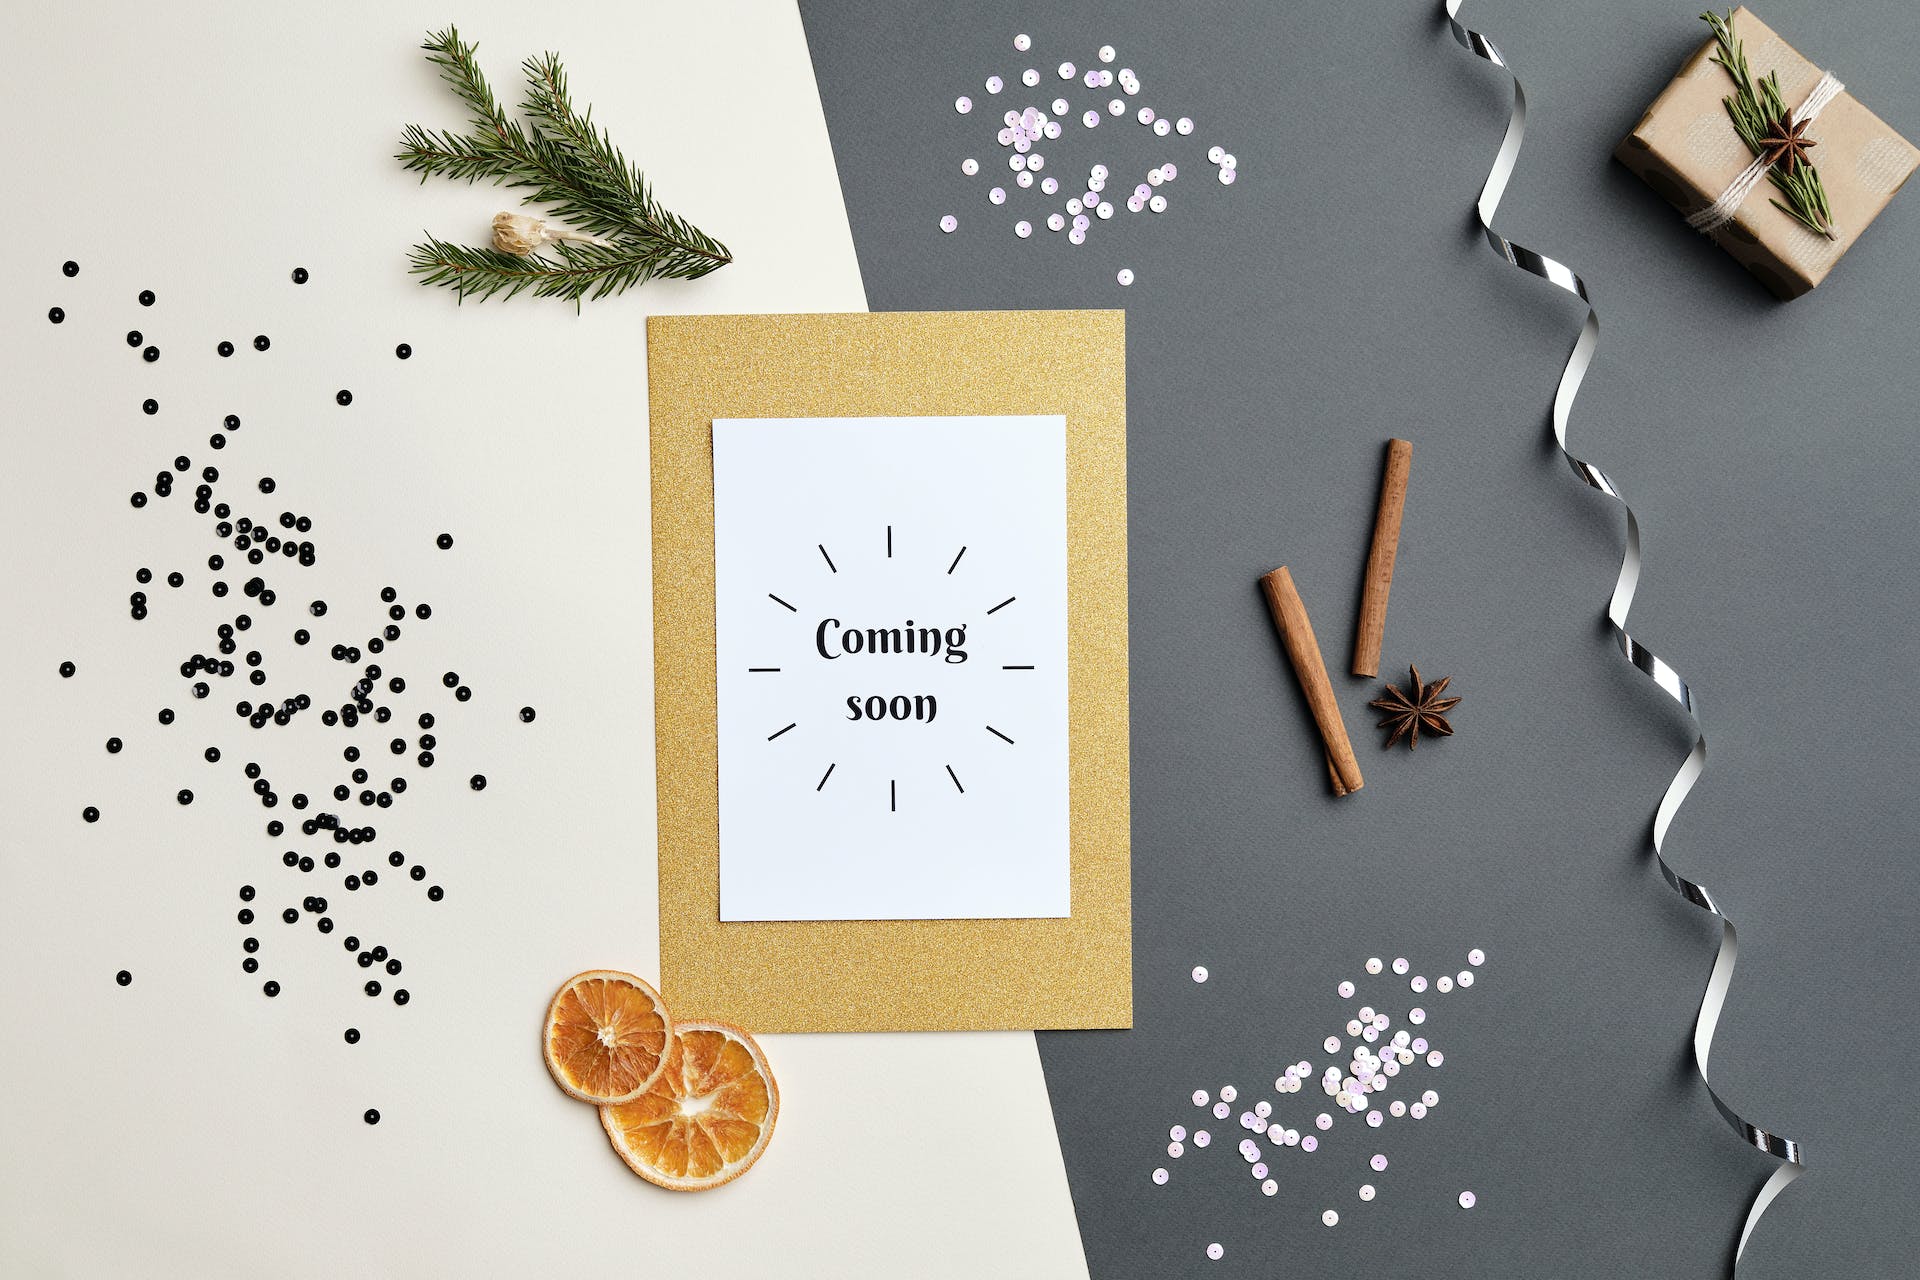 Coming Soon Greeting Card on White and Brown Star Print Textile - Photo by Boris Pavlikovsky: https://www.pexels.com/photo/happy-birthday-greeting-card-on-white-and-brown-star-print-textile-5499120/